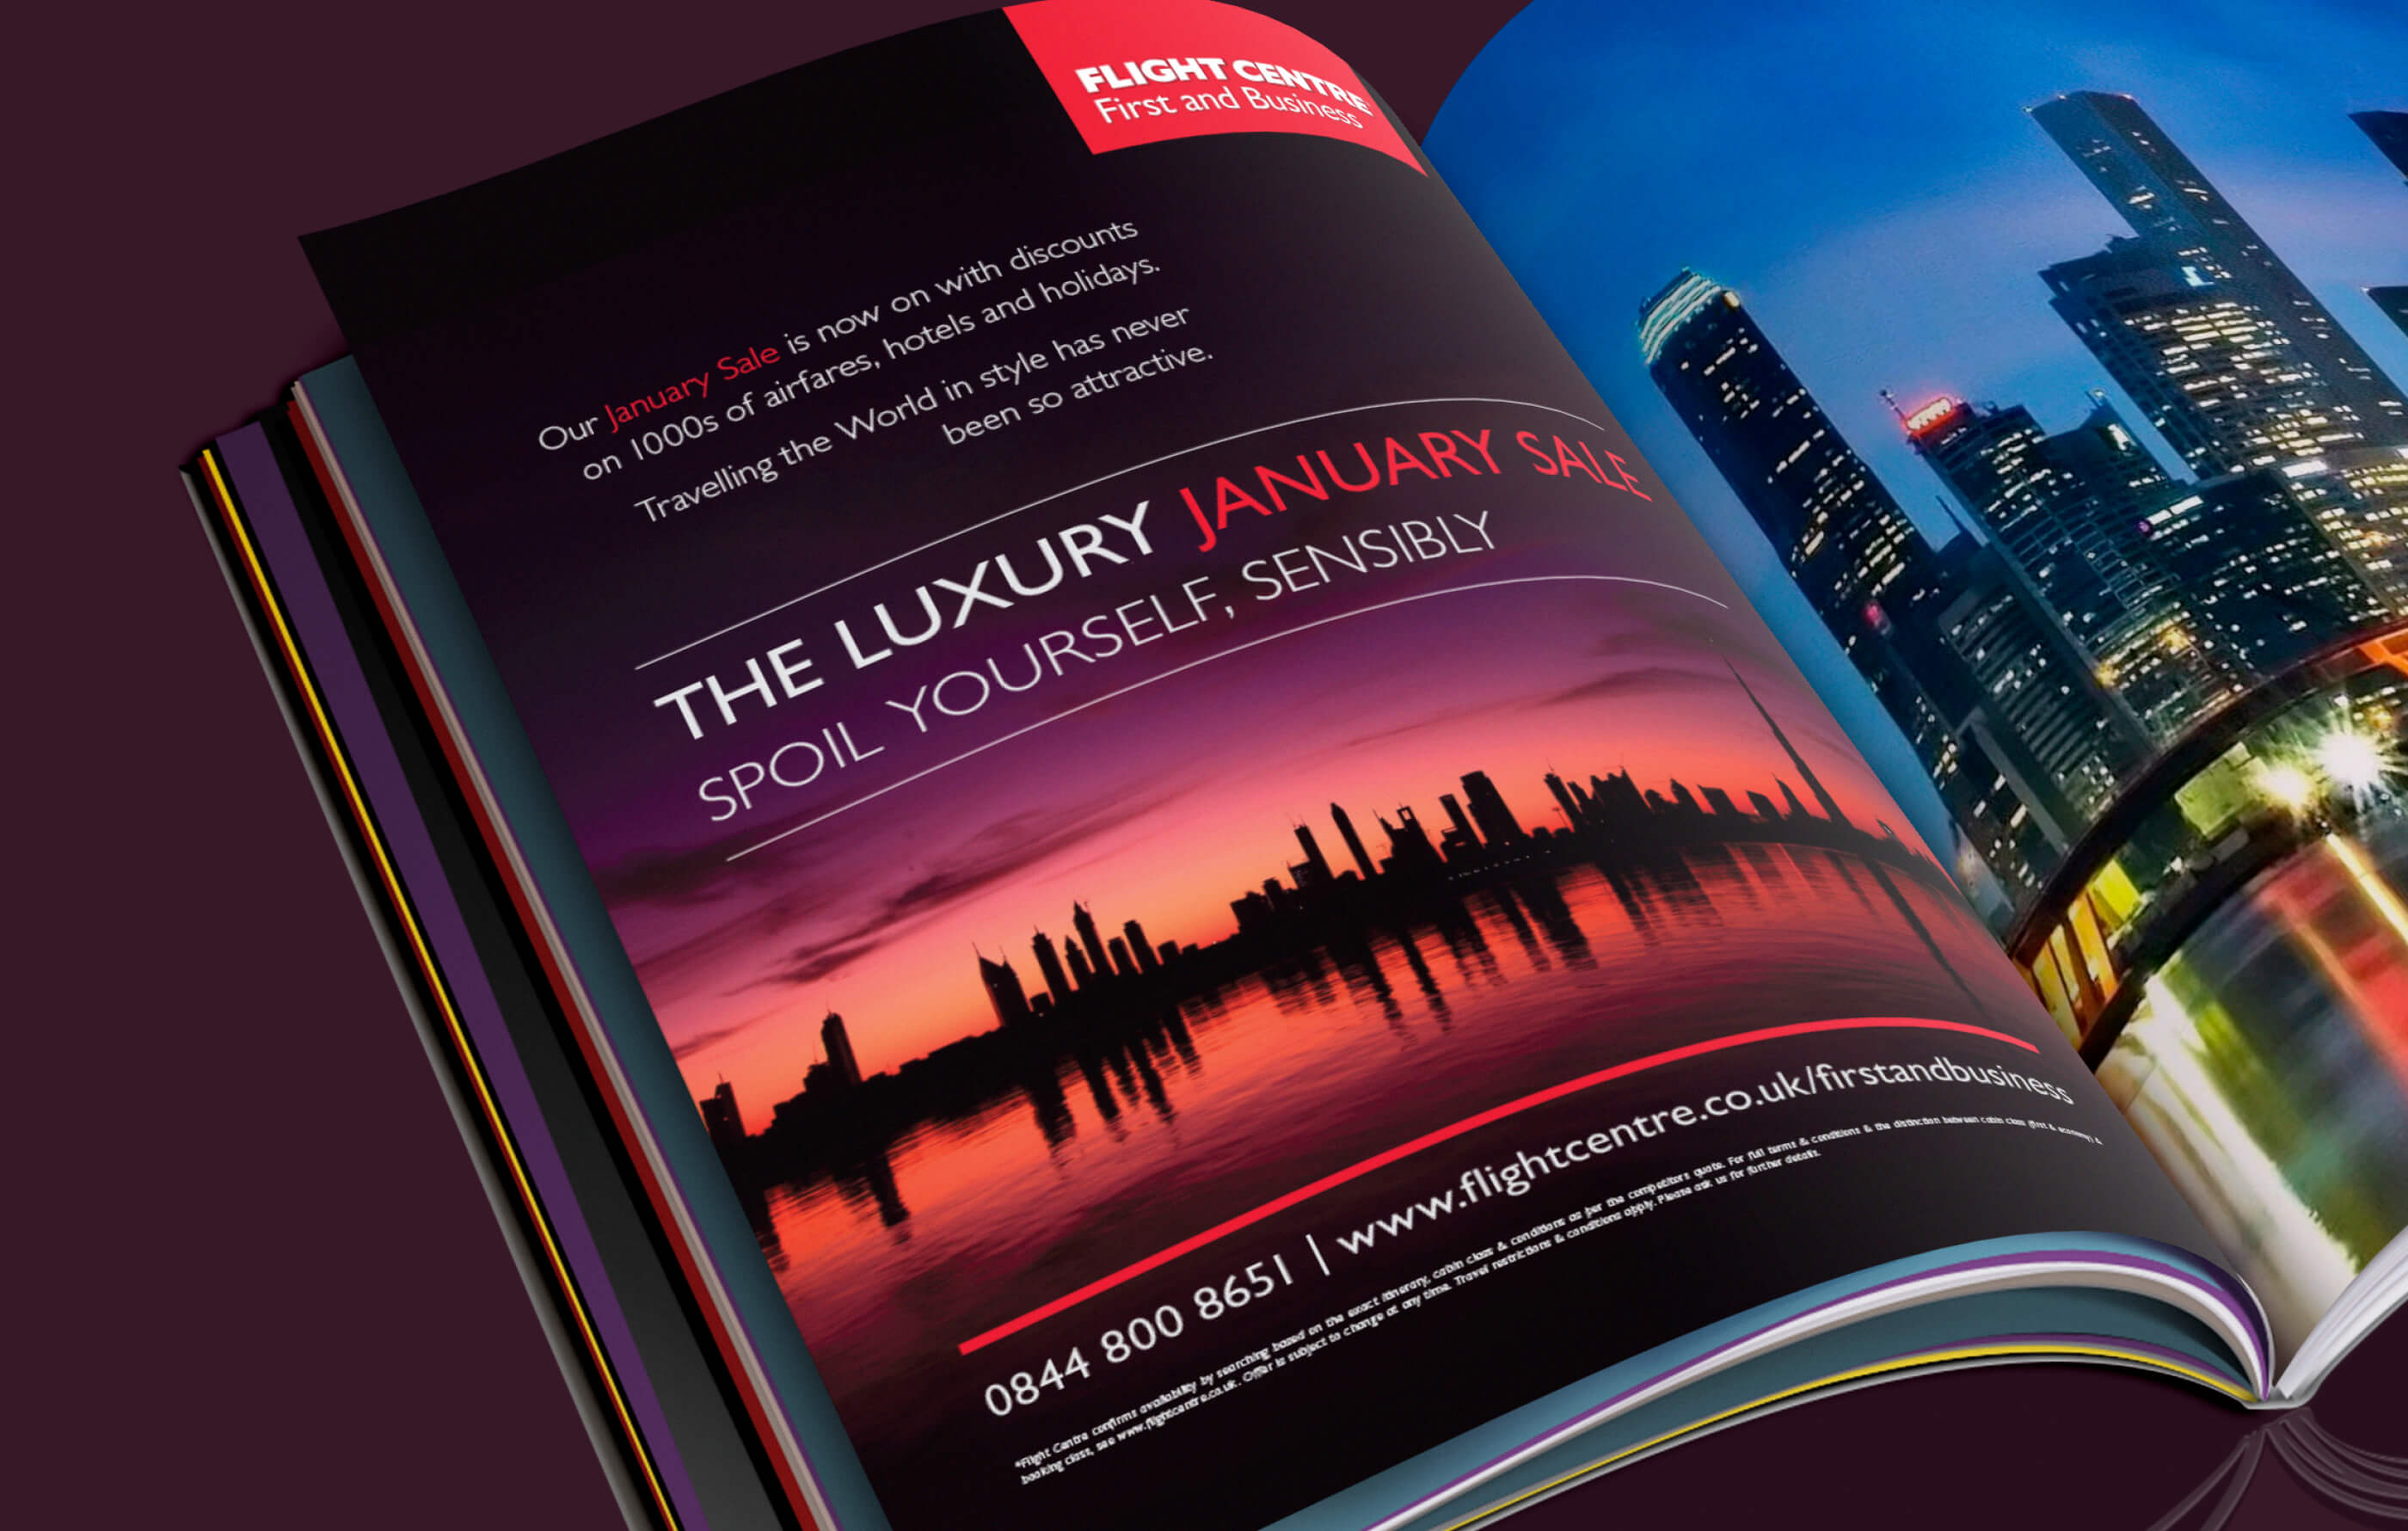 Spoil Yourself Sensibly luxury January sale printed advert inside a magazine spread